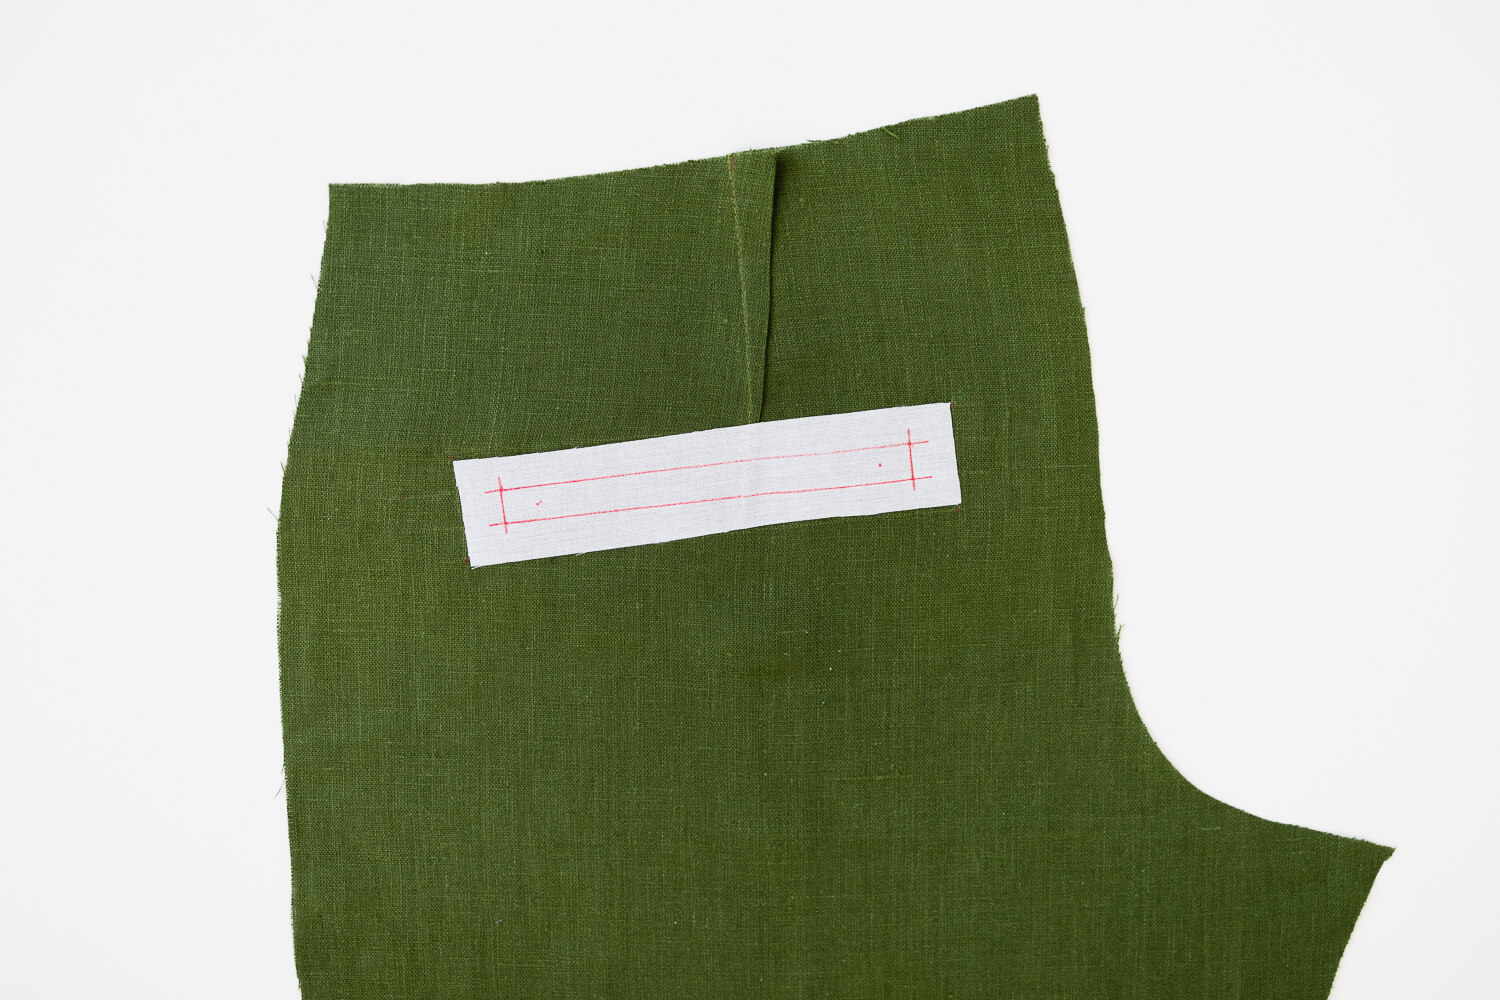 Perfectly usable but sewn up pockets on women's slacks. : r